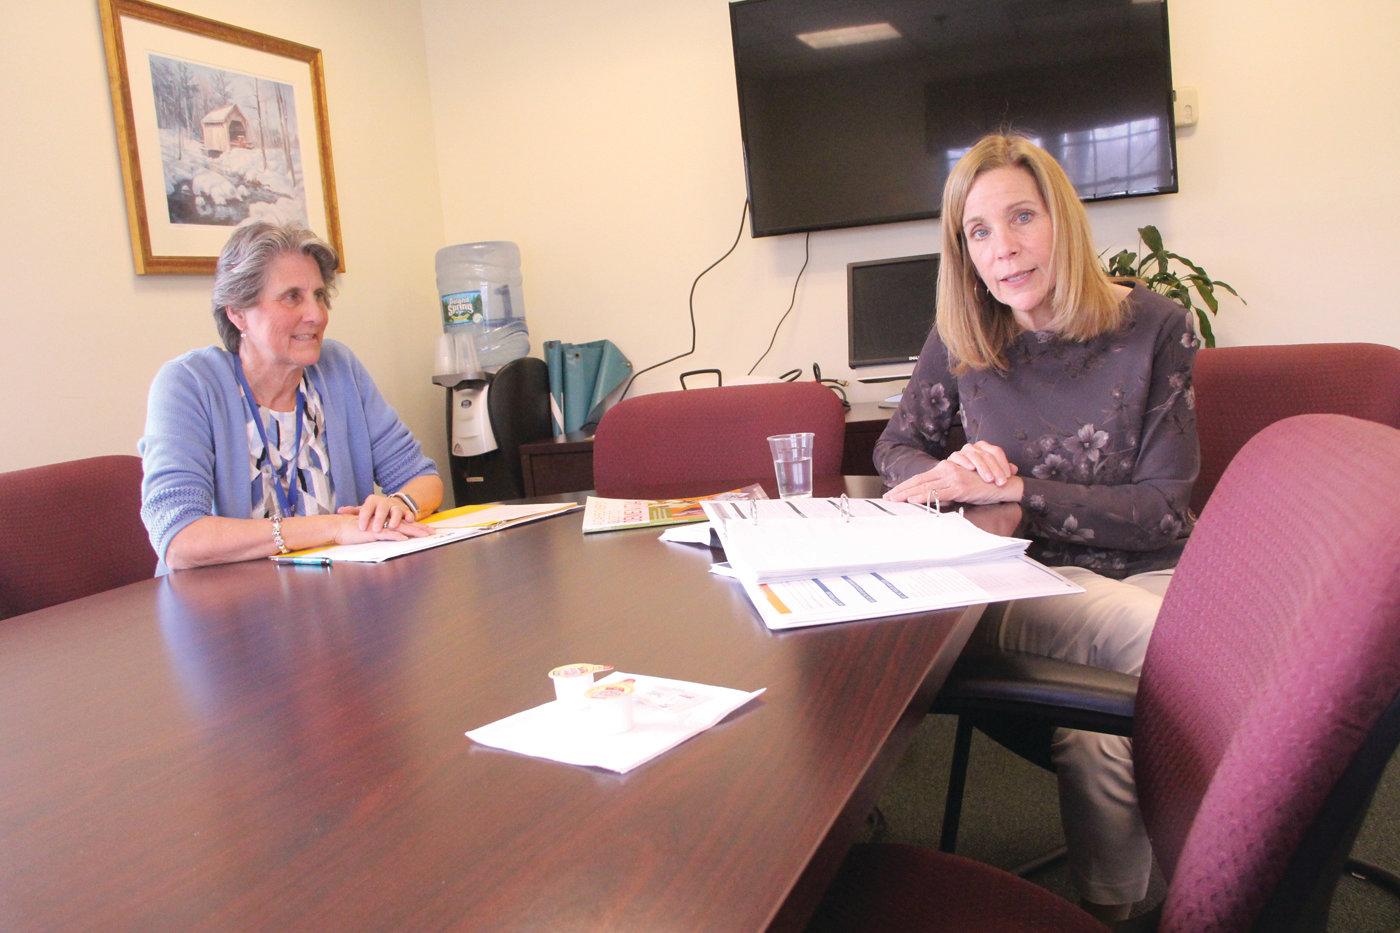 HELPING CAREGIVERS: Kim Morris and Dottie Santagata of Cornerstone Adult Services review procedures of the nationwide Improving Outcomes for Families and Older Adults: Adult Day Service Plus (ADS Plus) research study the center is participating in.